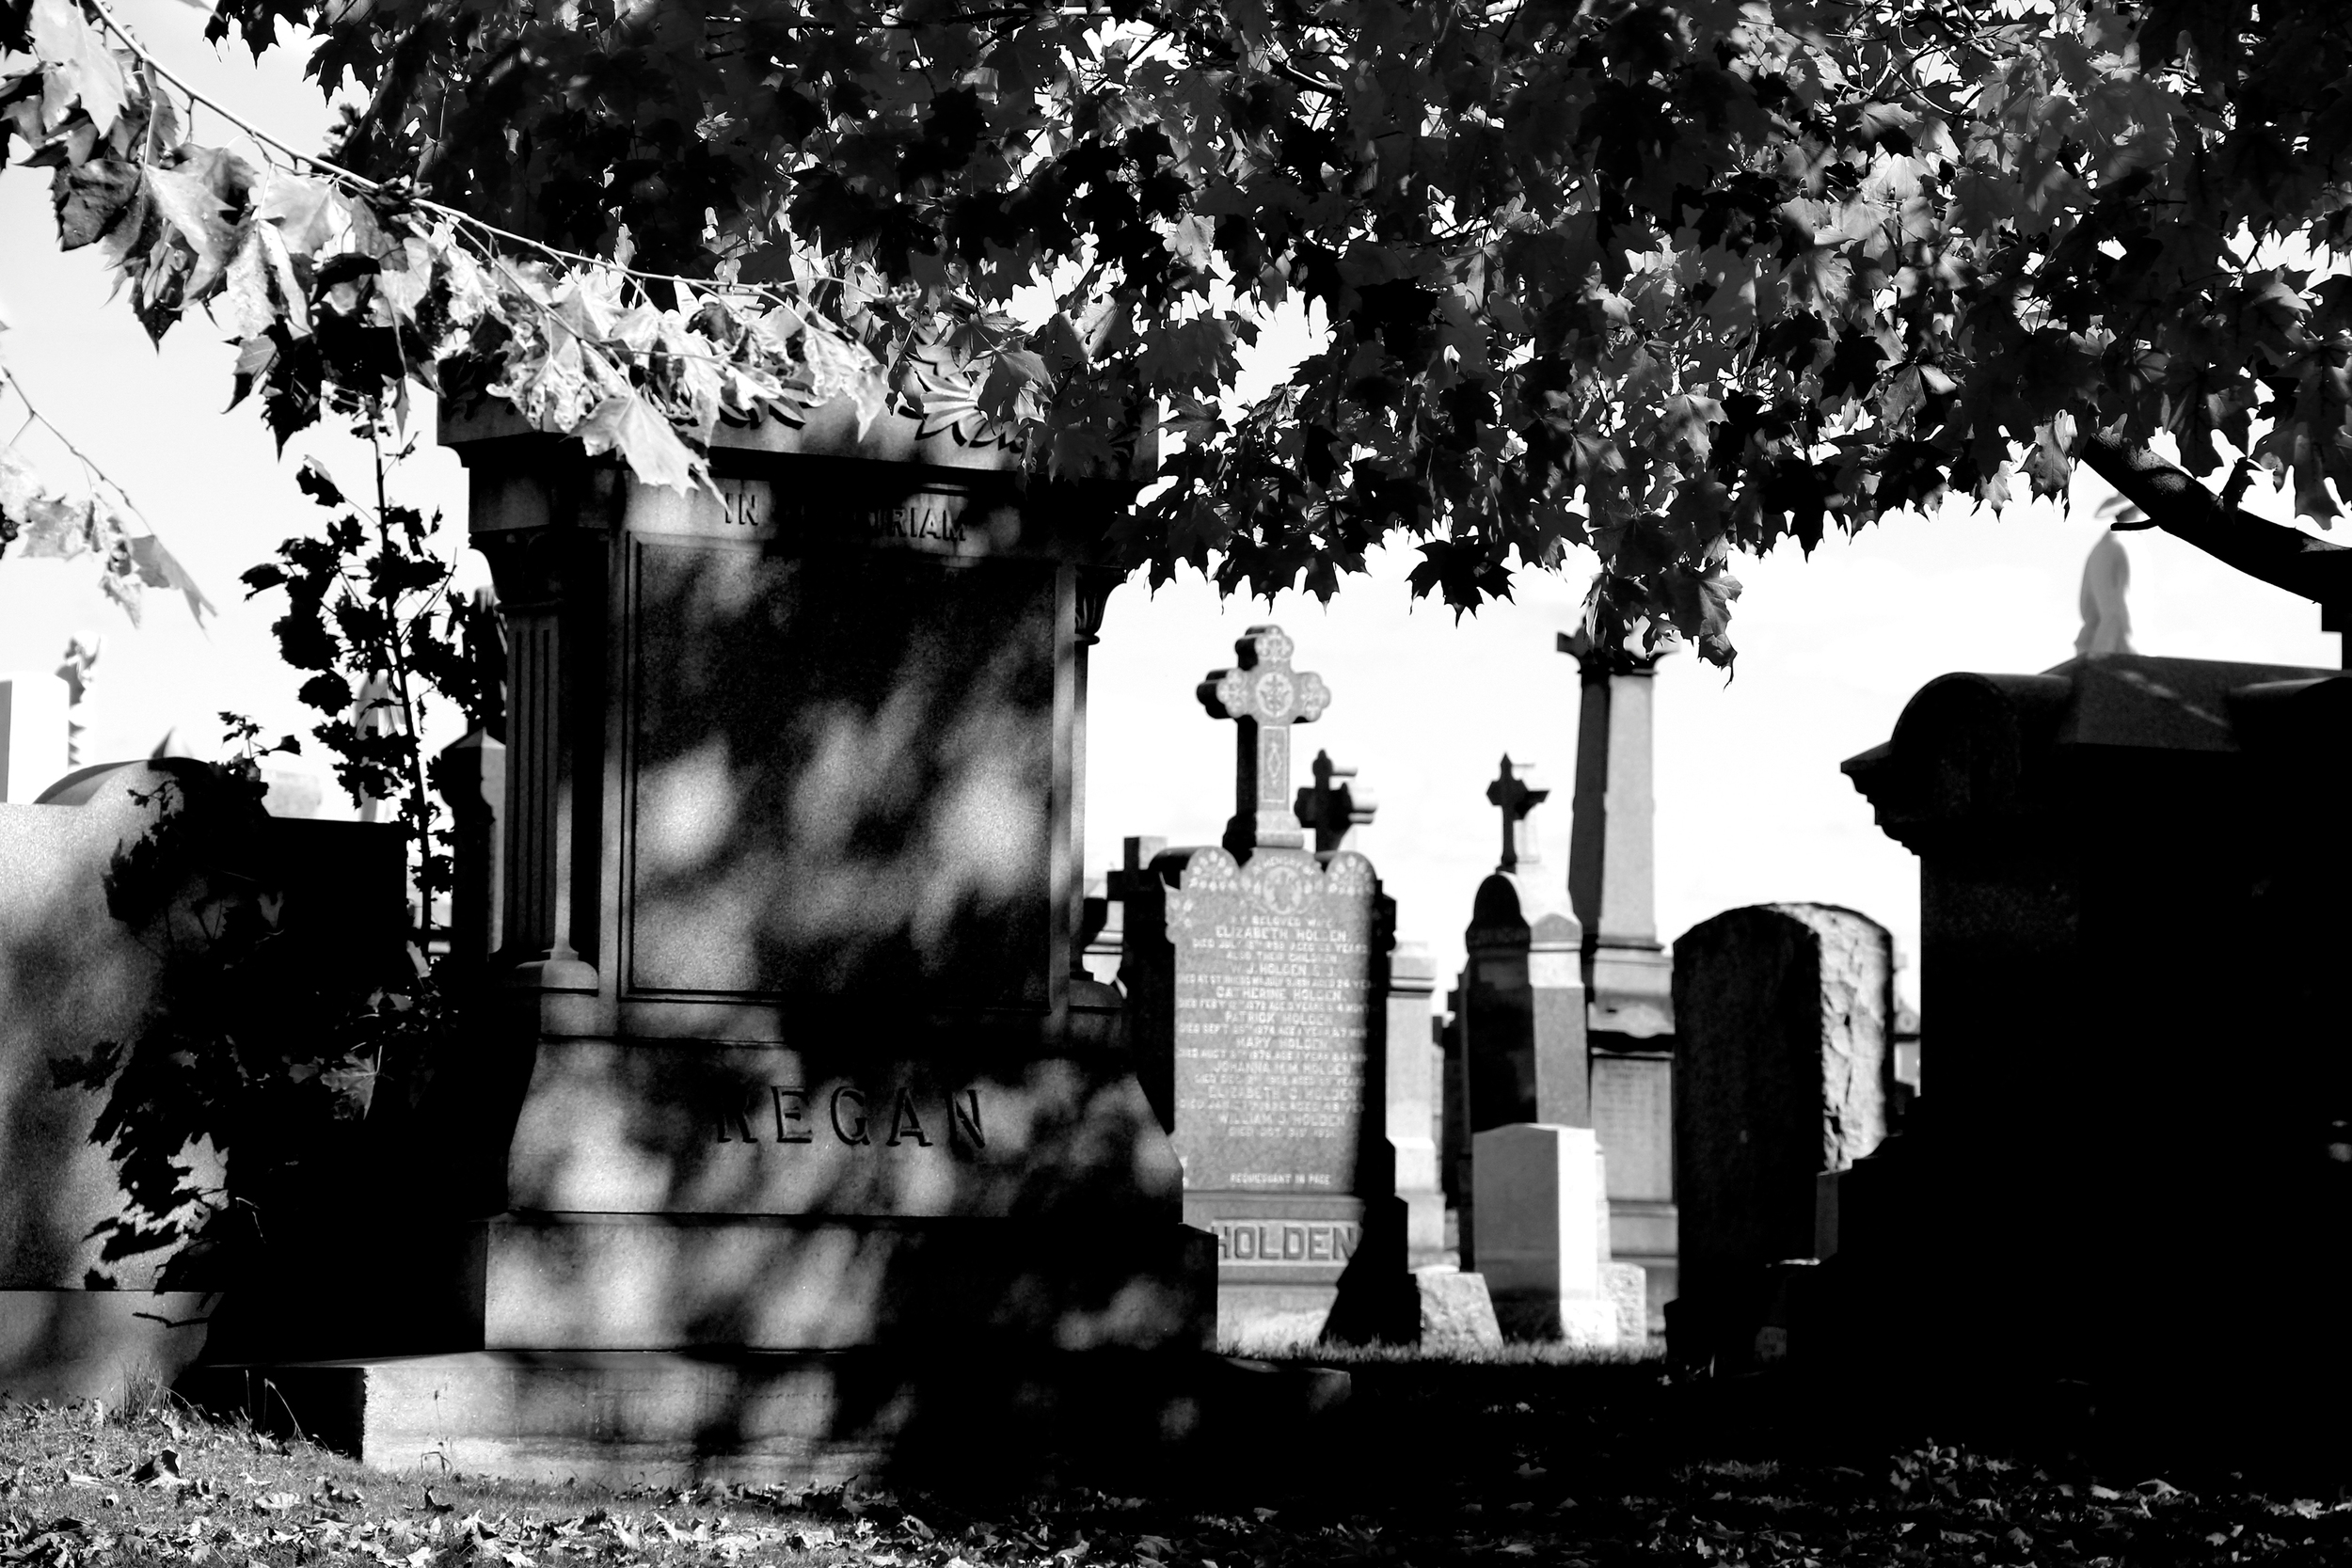   Image captured at the Calgary Cemetery in Queens, NY 2013. &nbsp; &nbsp; 